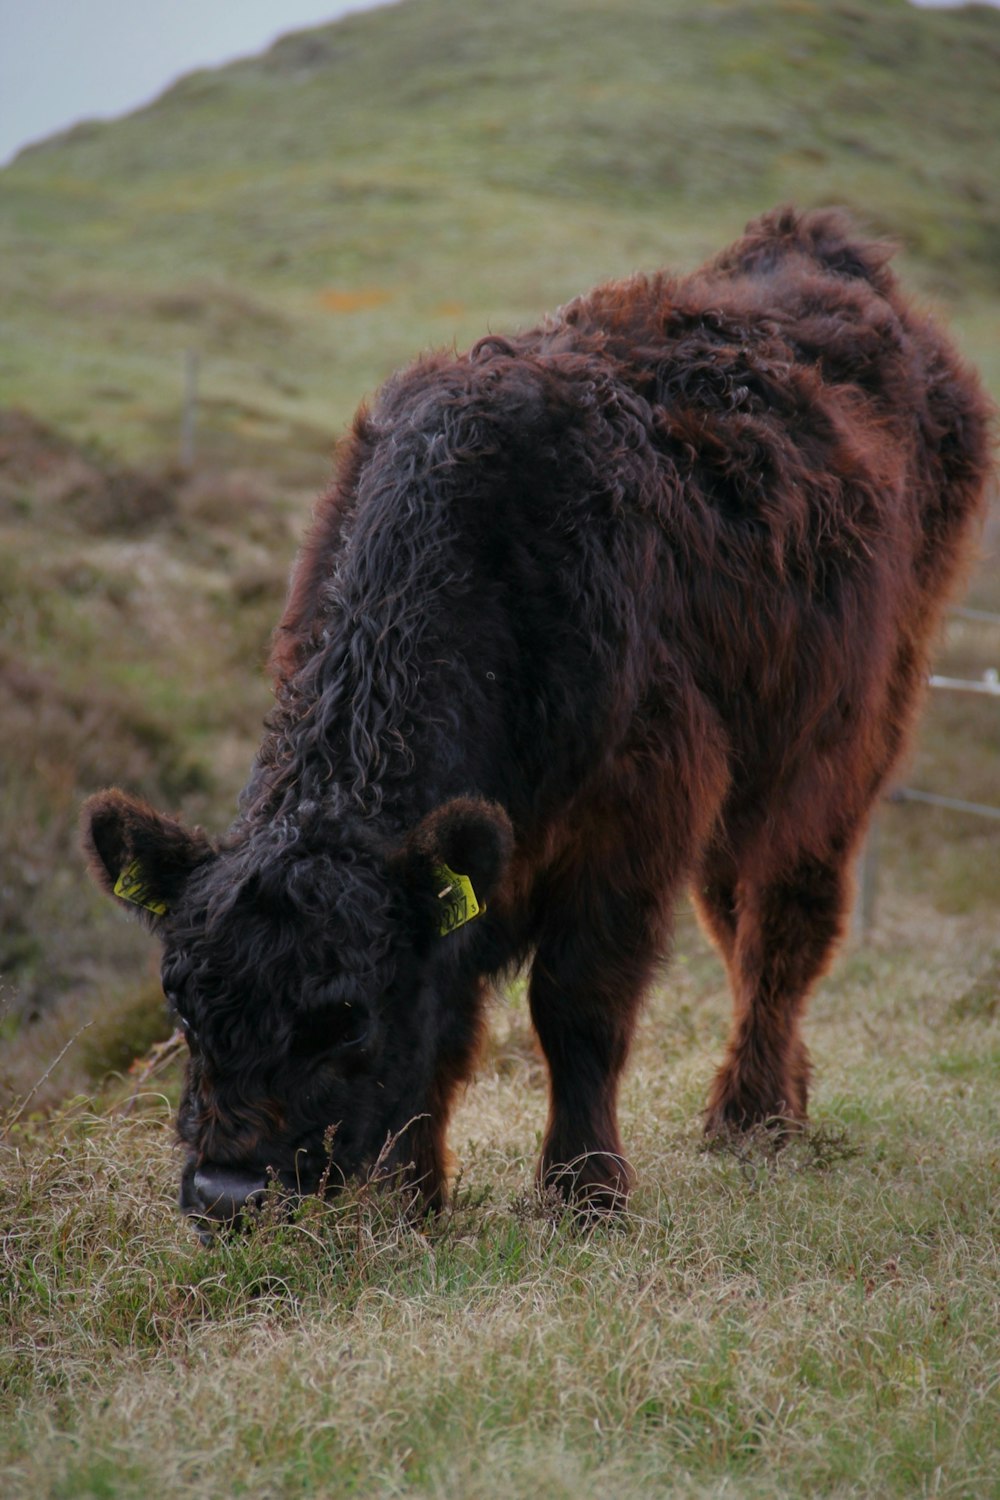 a brown cow grazing in a grassy field